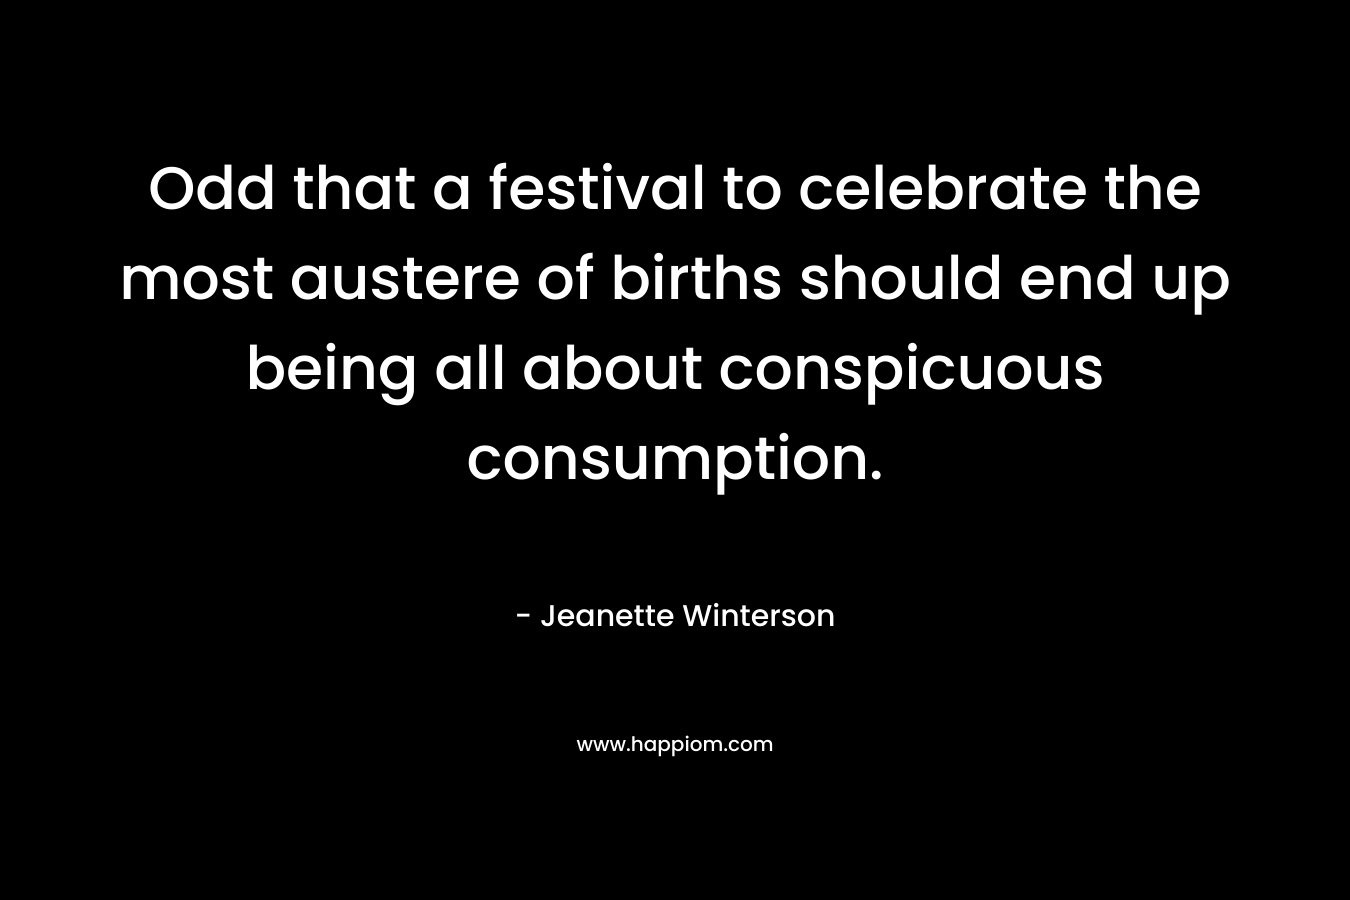 Odd that a festival to celebrate the most austere of births should end up being all about conspicuous consumption. – Jeanette Winterson